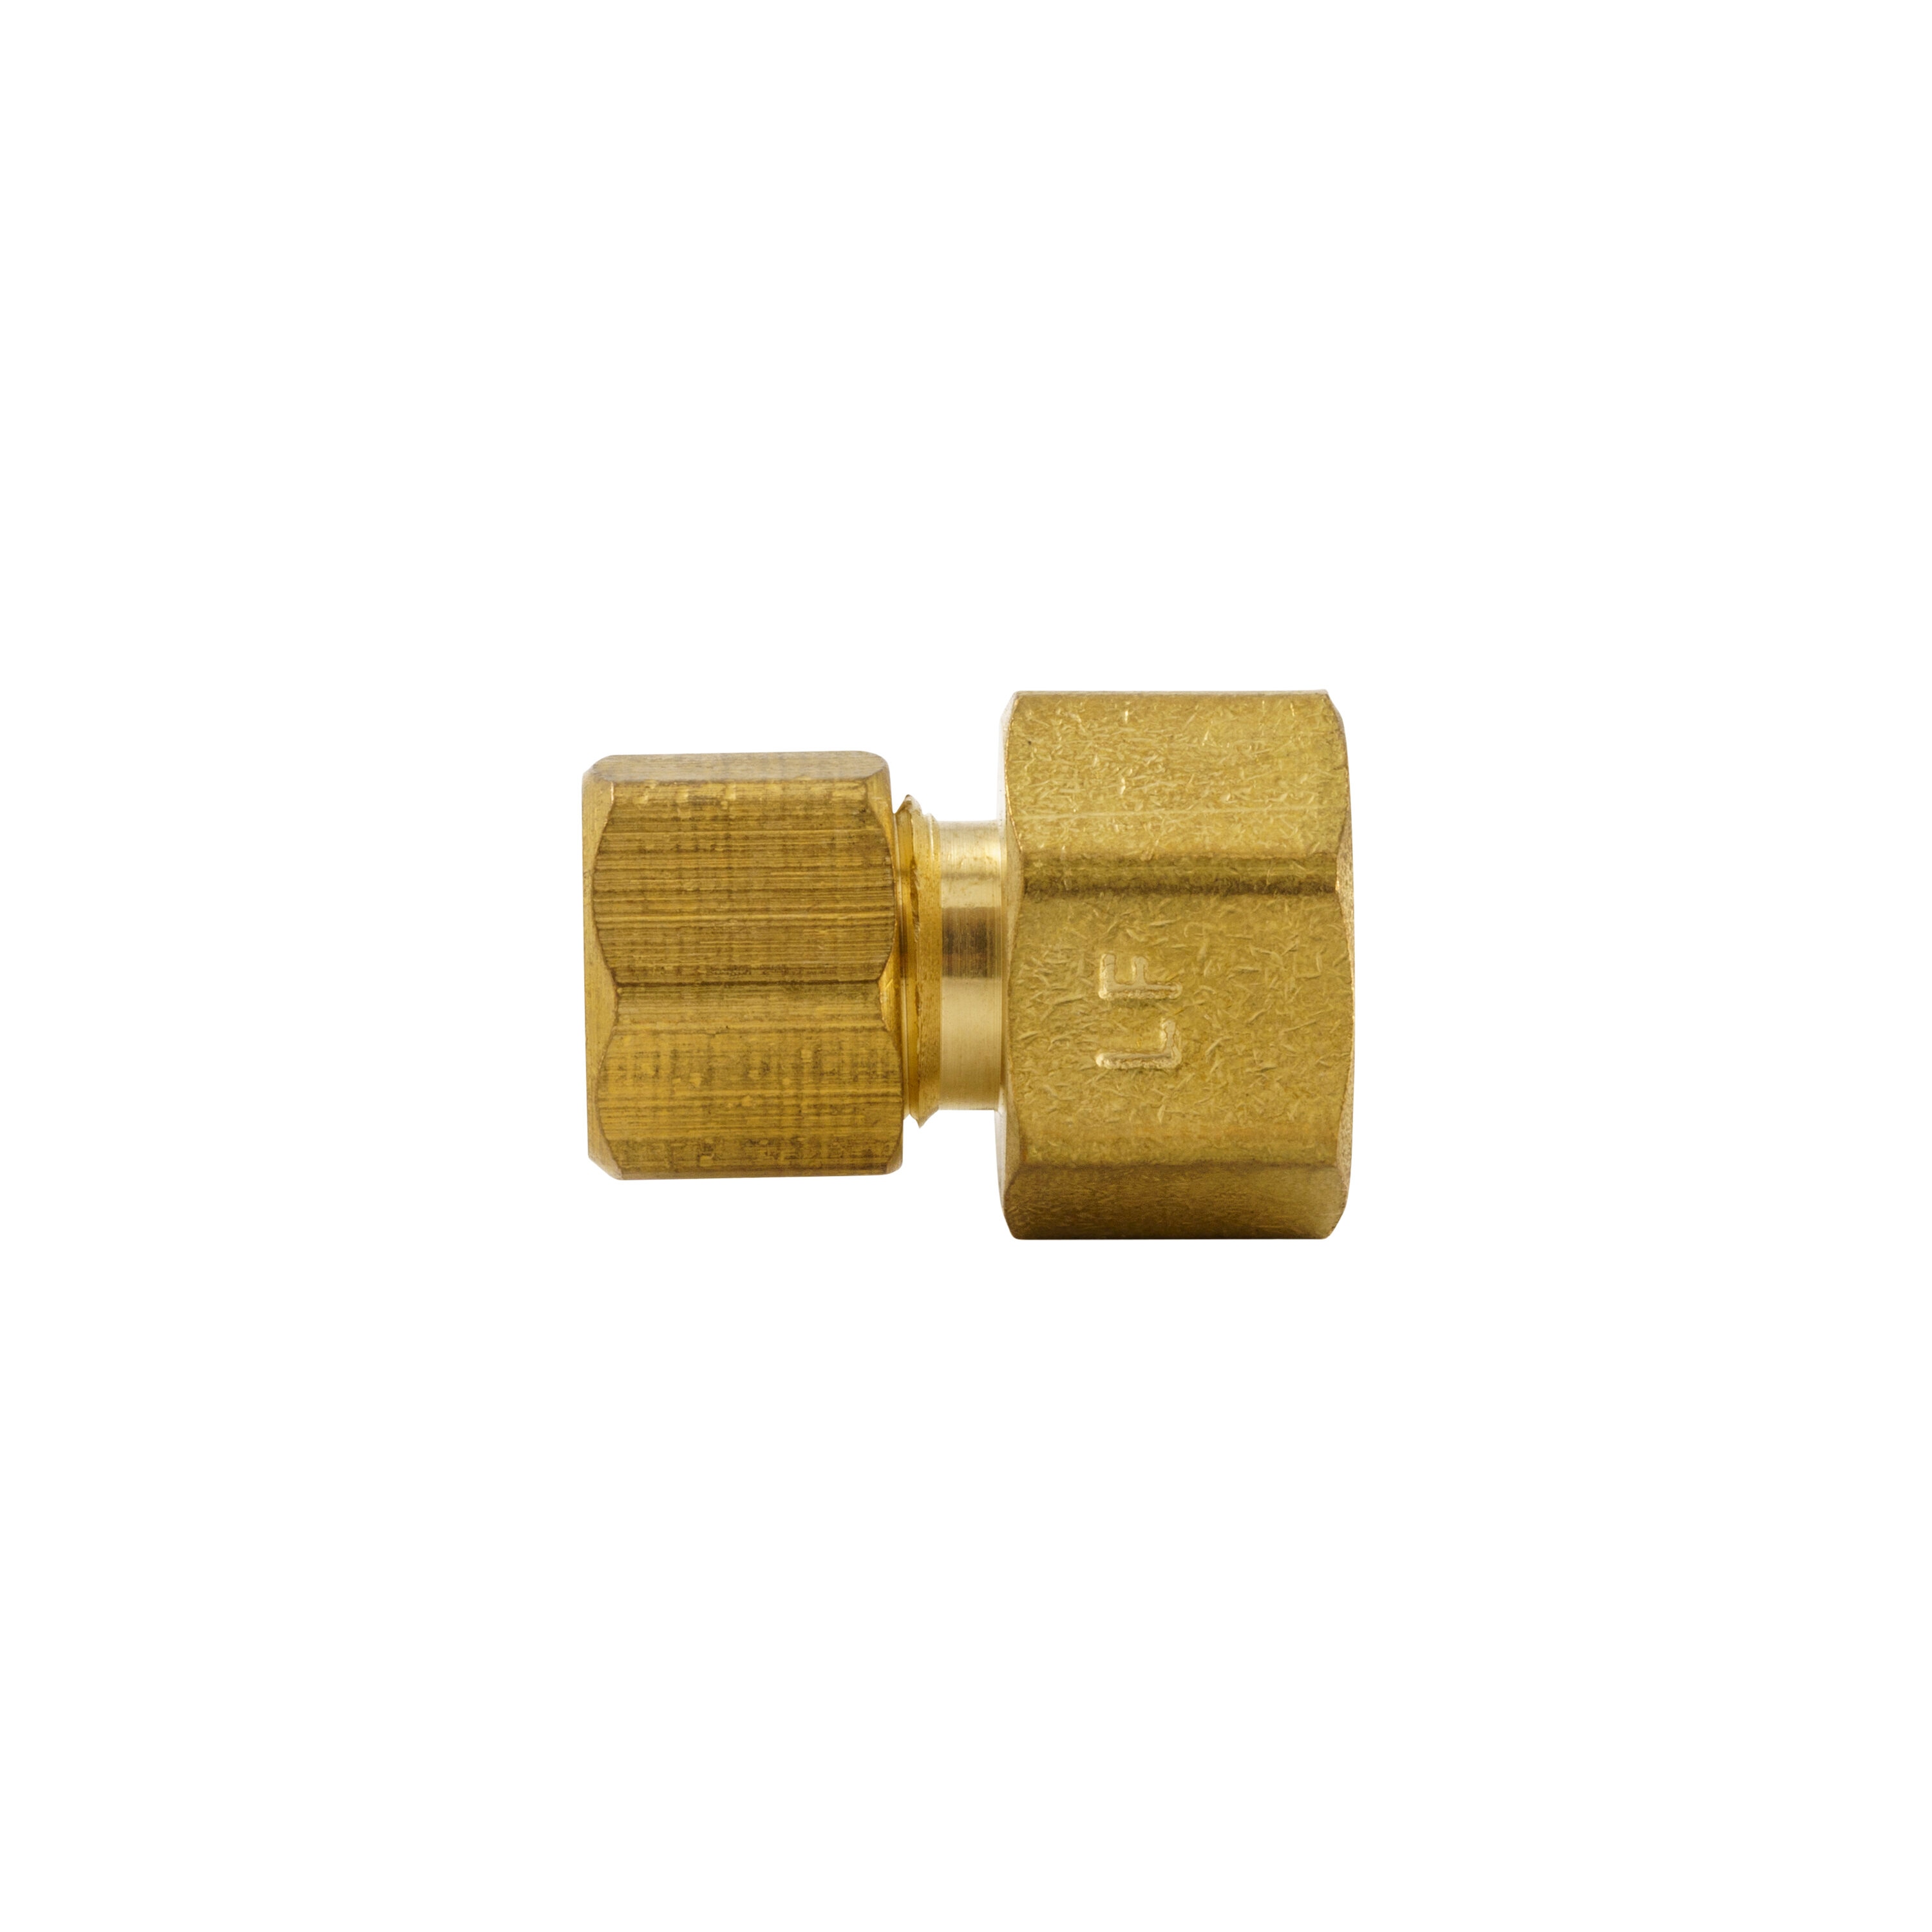 Proline Series 1/4-in x 1/8-in Compression Elbow Fitting in the